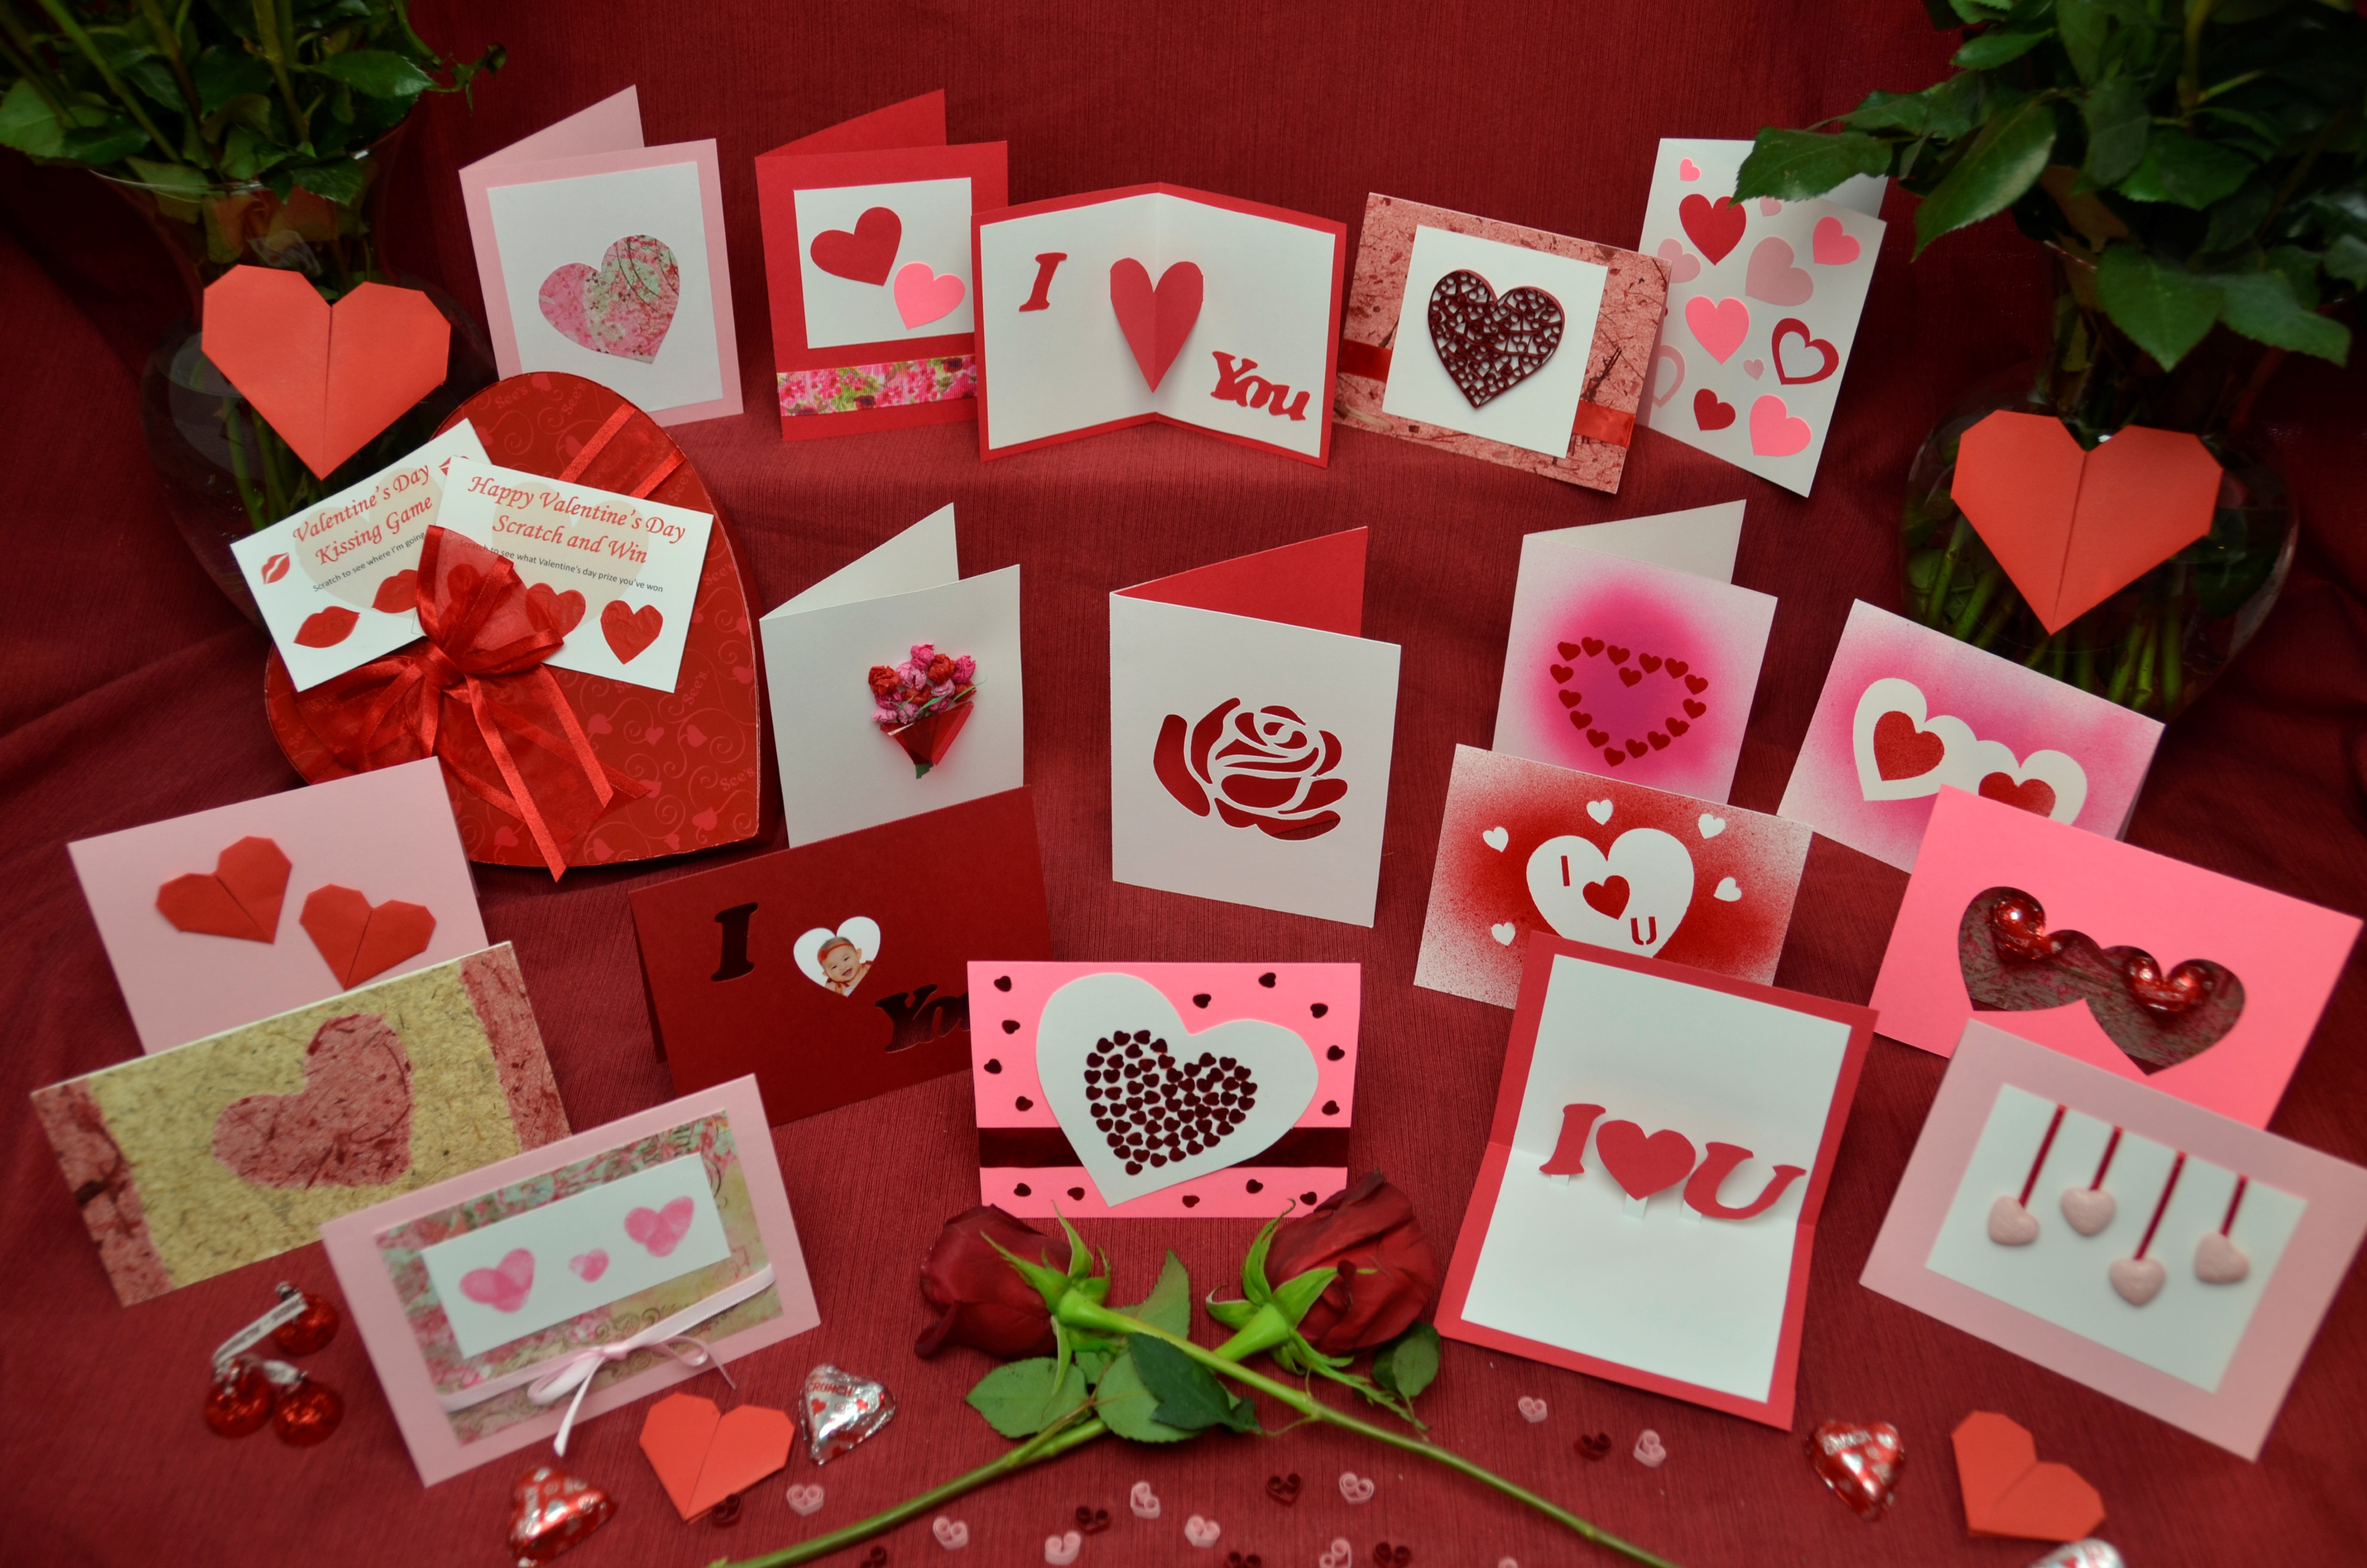 Finger Paint Birthday Card Ideas Top 10 Ideas For Valentines Day Cards Creative Pop Up Cards